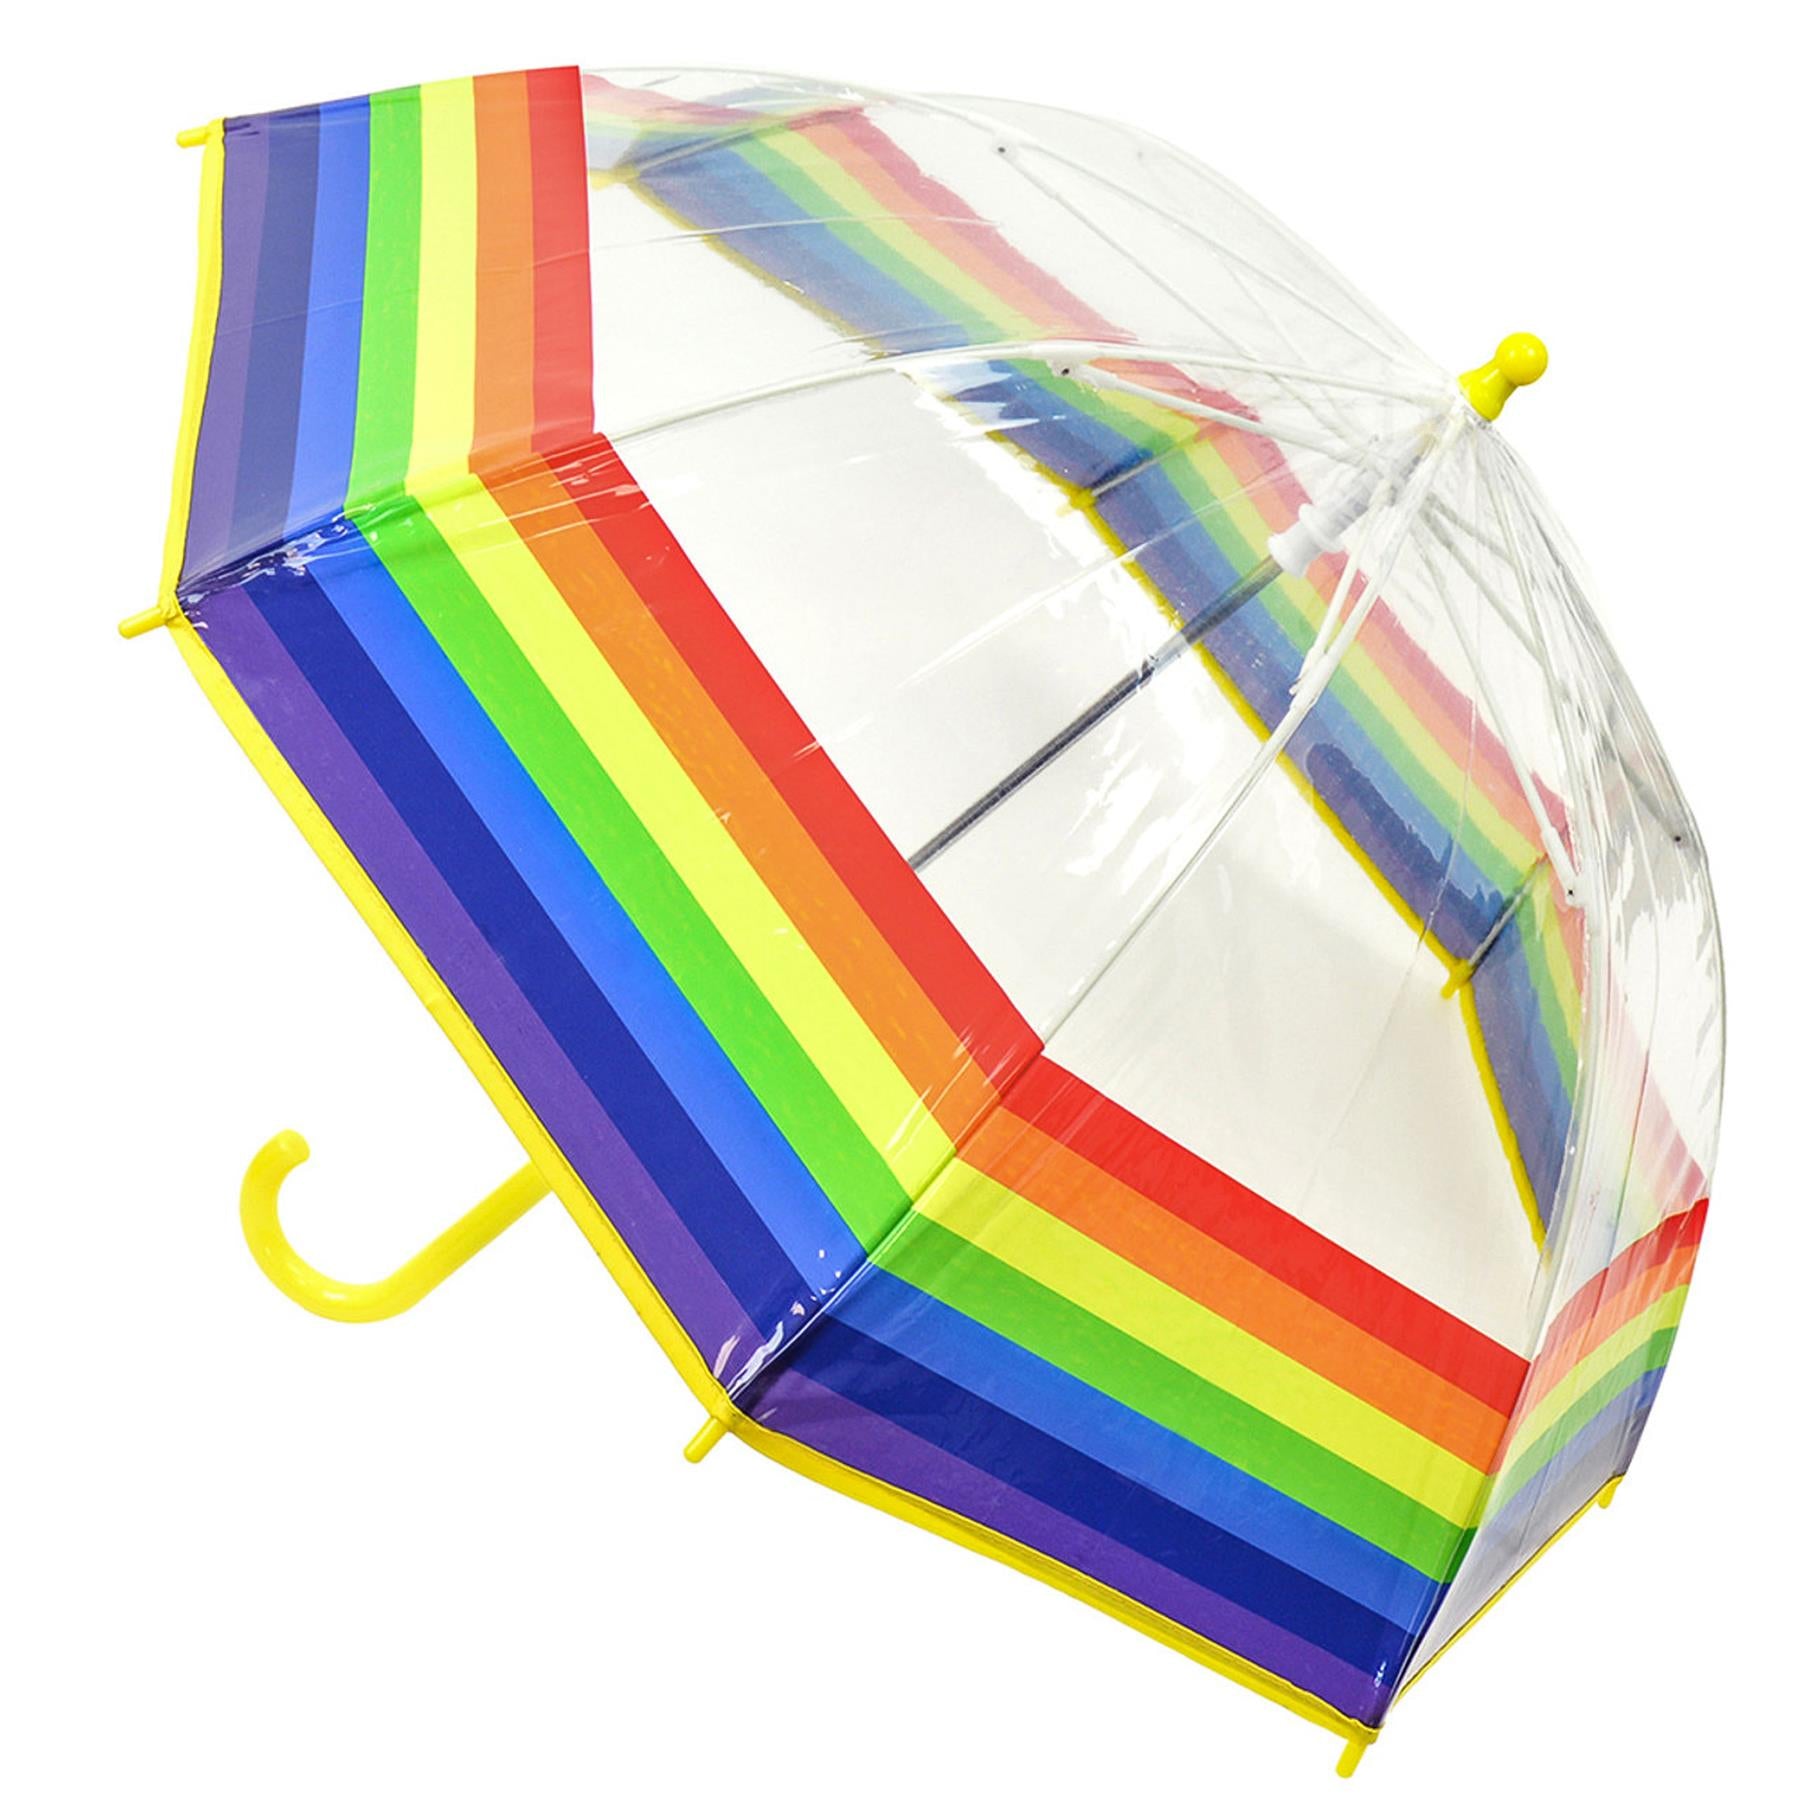 A2Z Kids POE Clear Dome Umbrella Wind and Rain Resistant Outdoor Travel Brolly